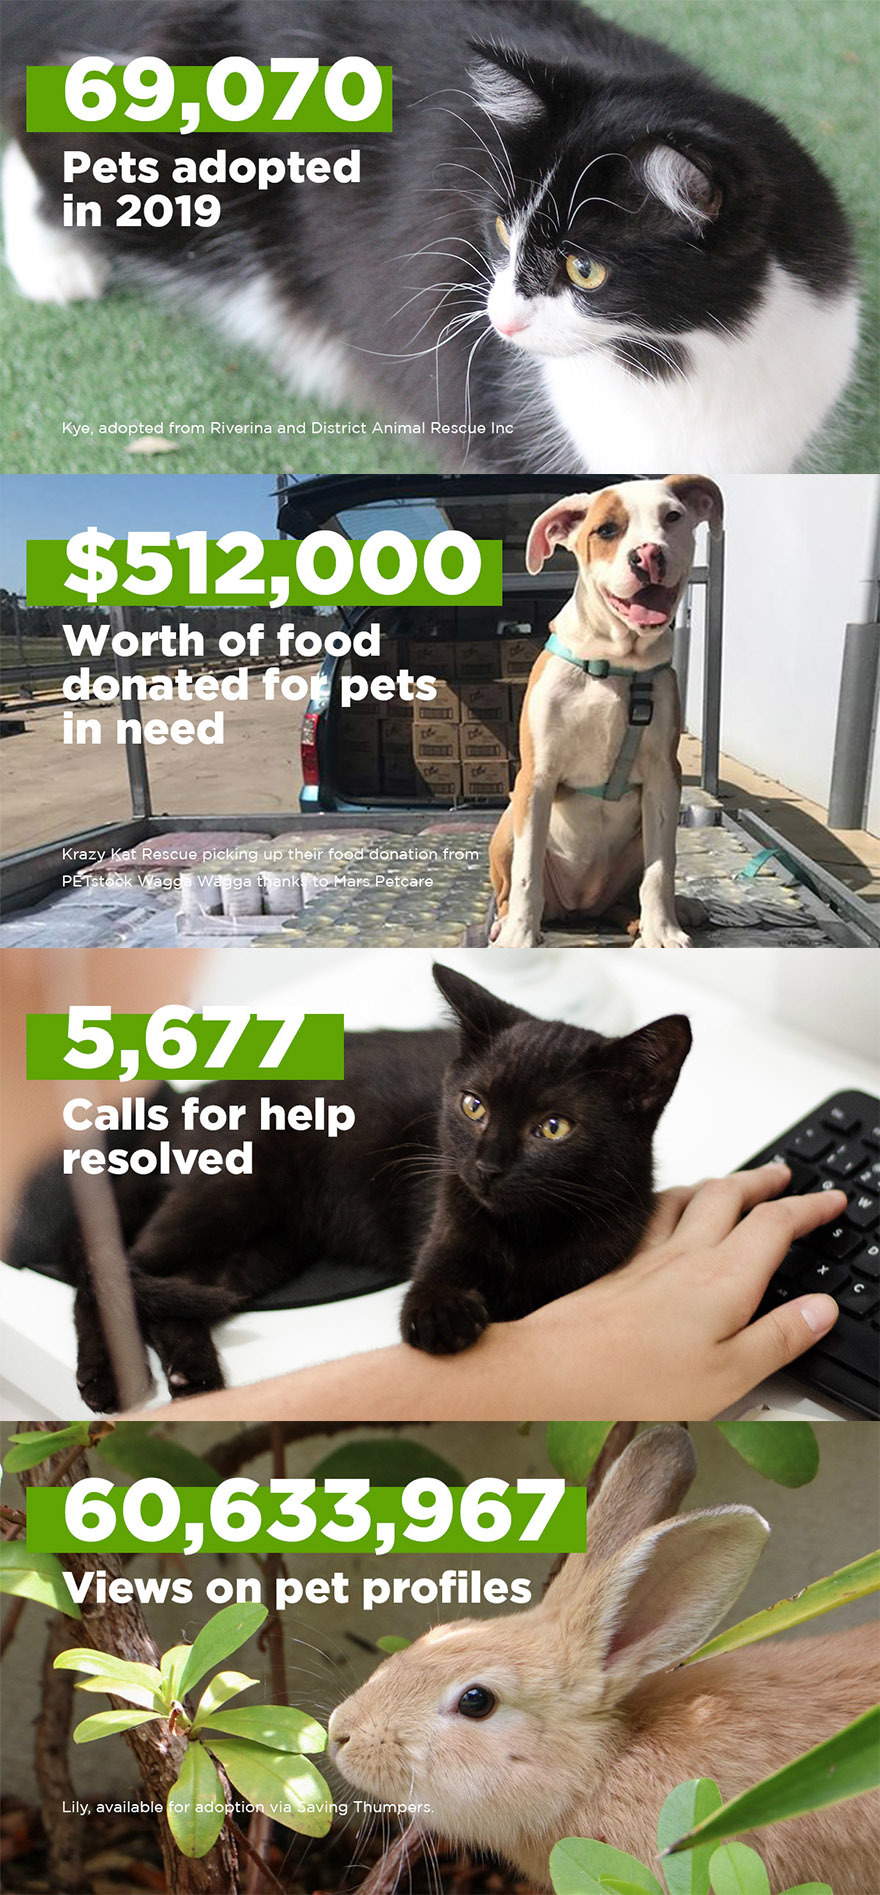 The impact of your kindness ~ 2019 - PetRescue